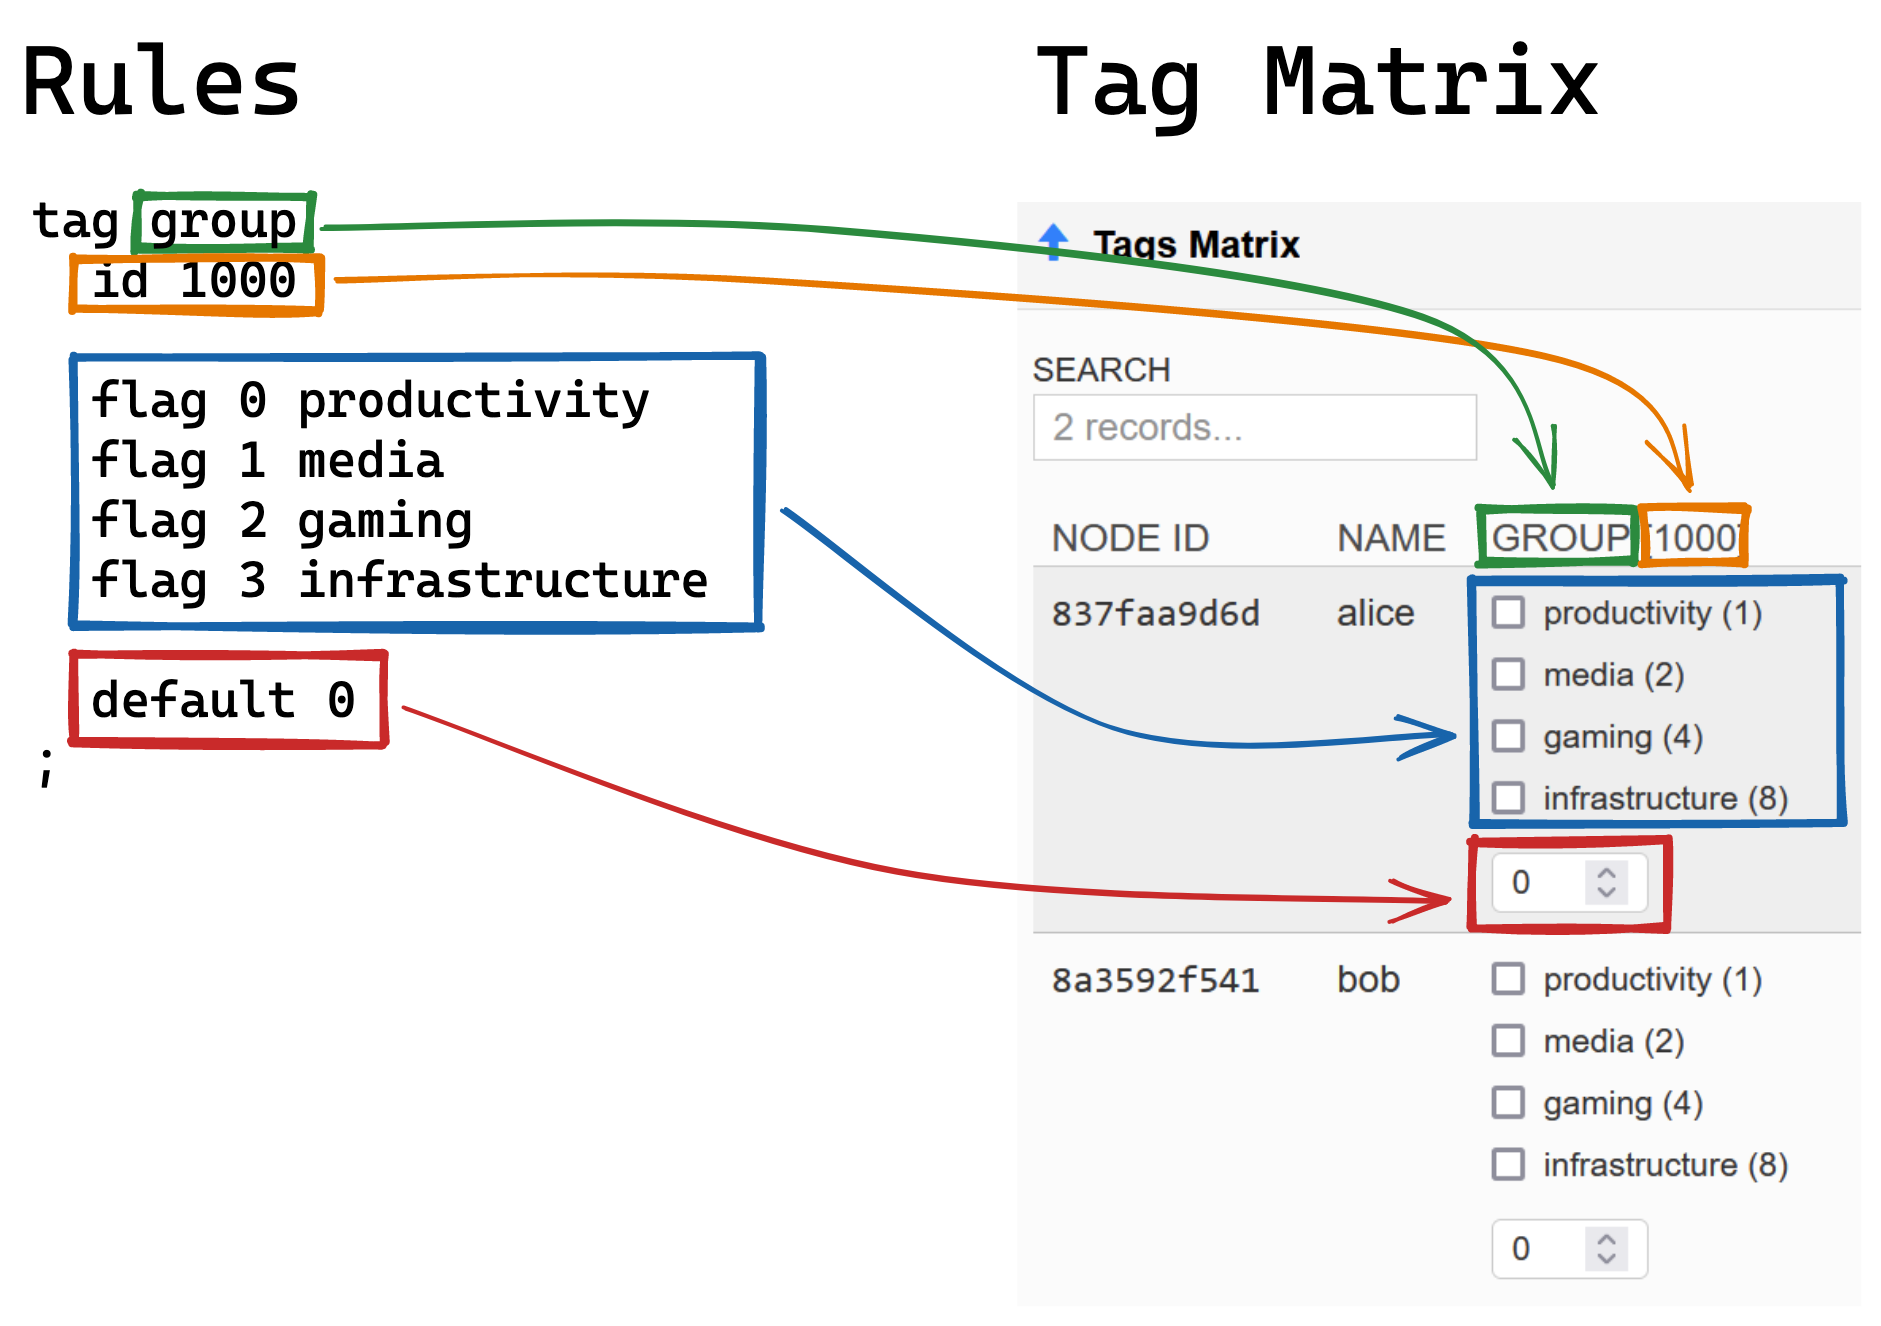 Rules and Resulting Tag Matrix